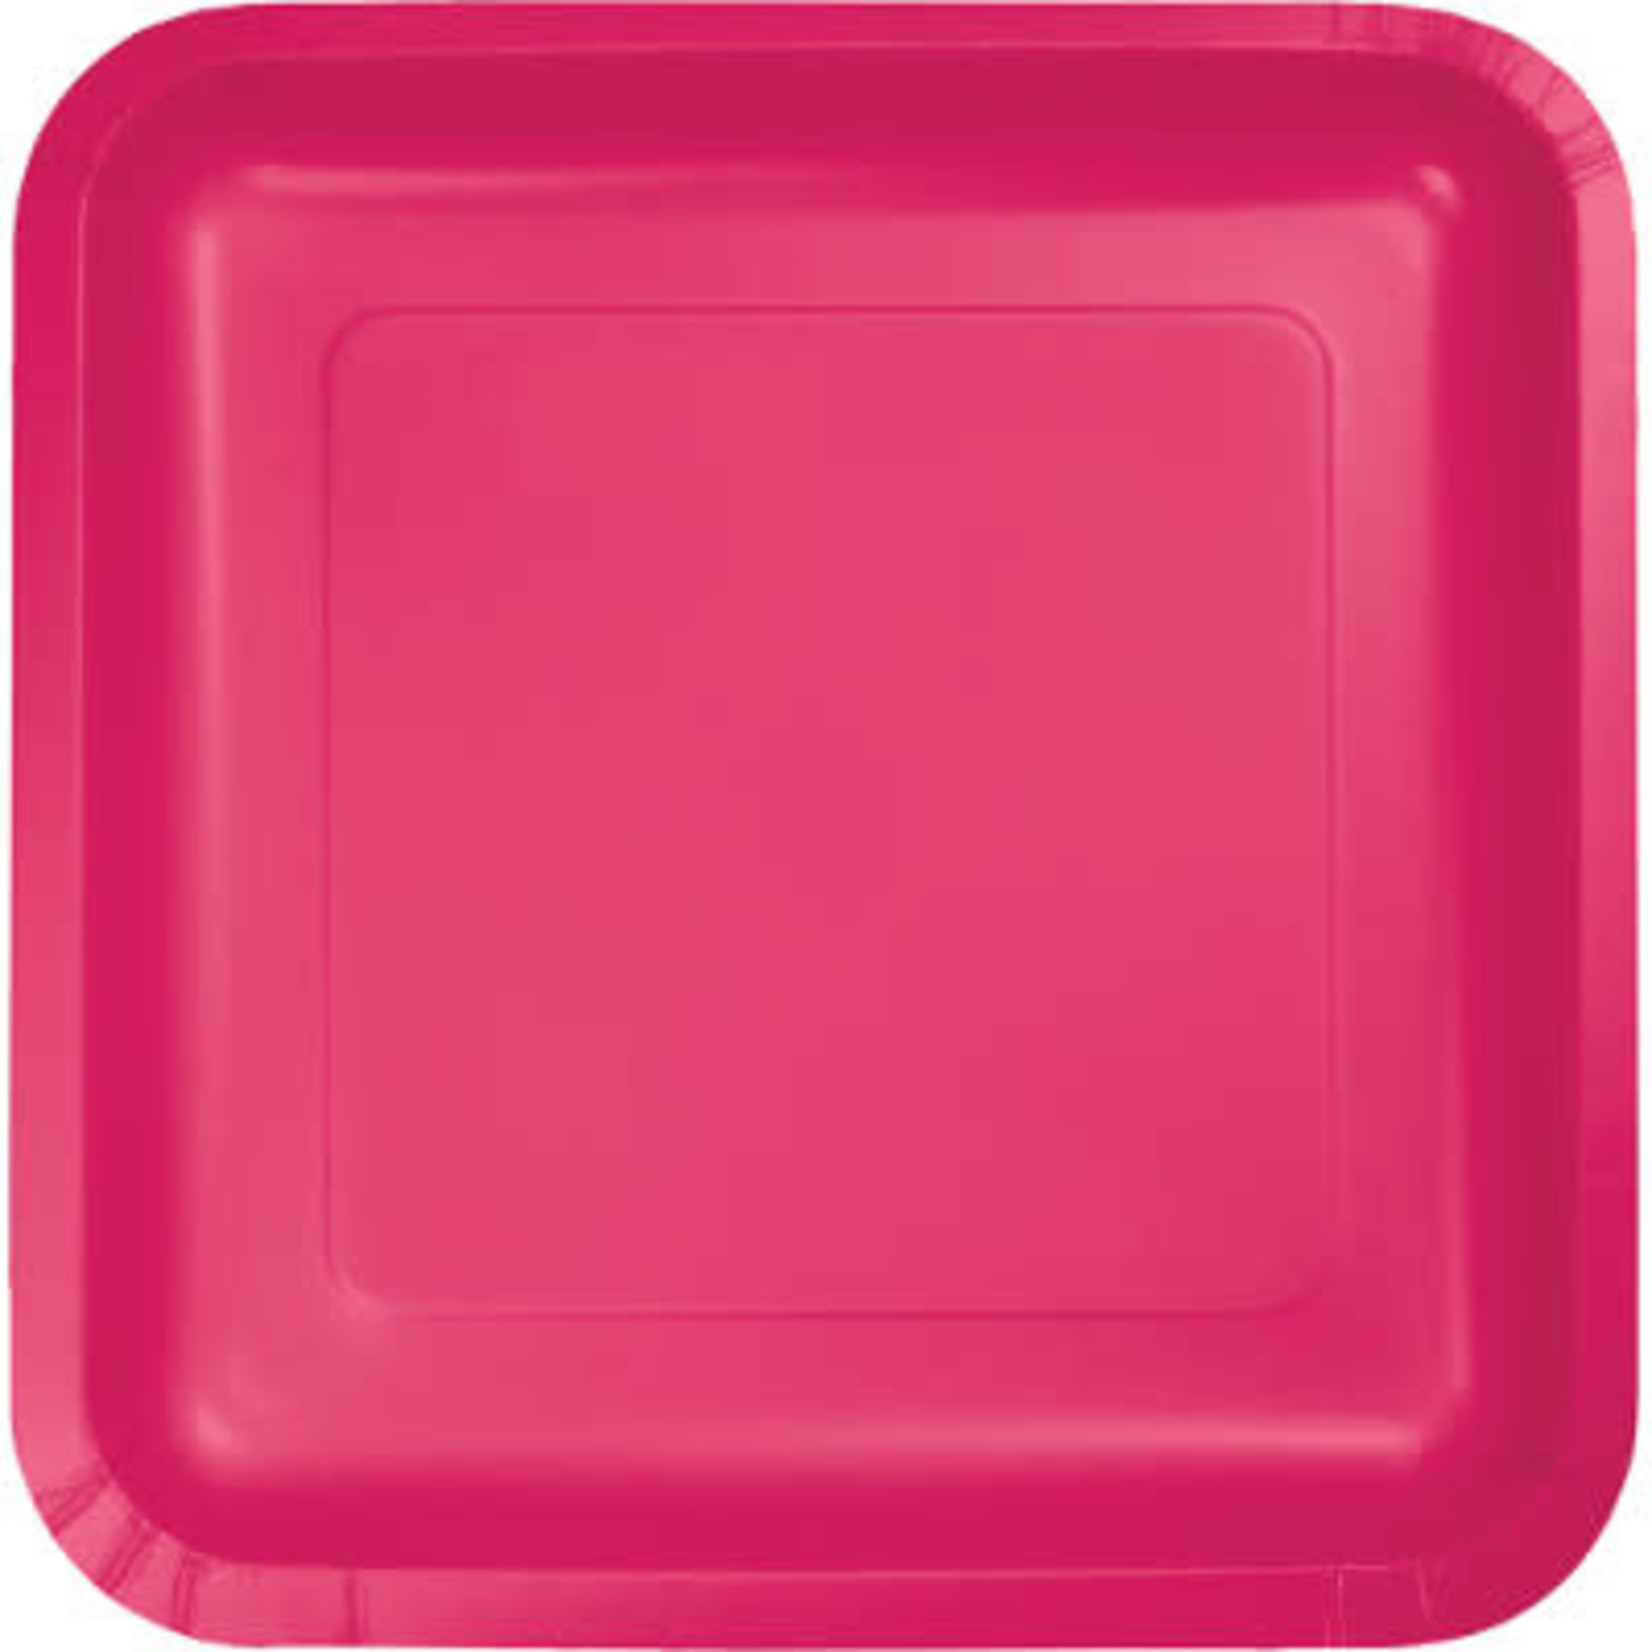 Touch of Color 9" Magenta Pink Square Paper Plates - 18ct.